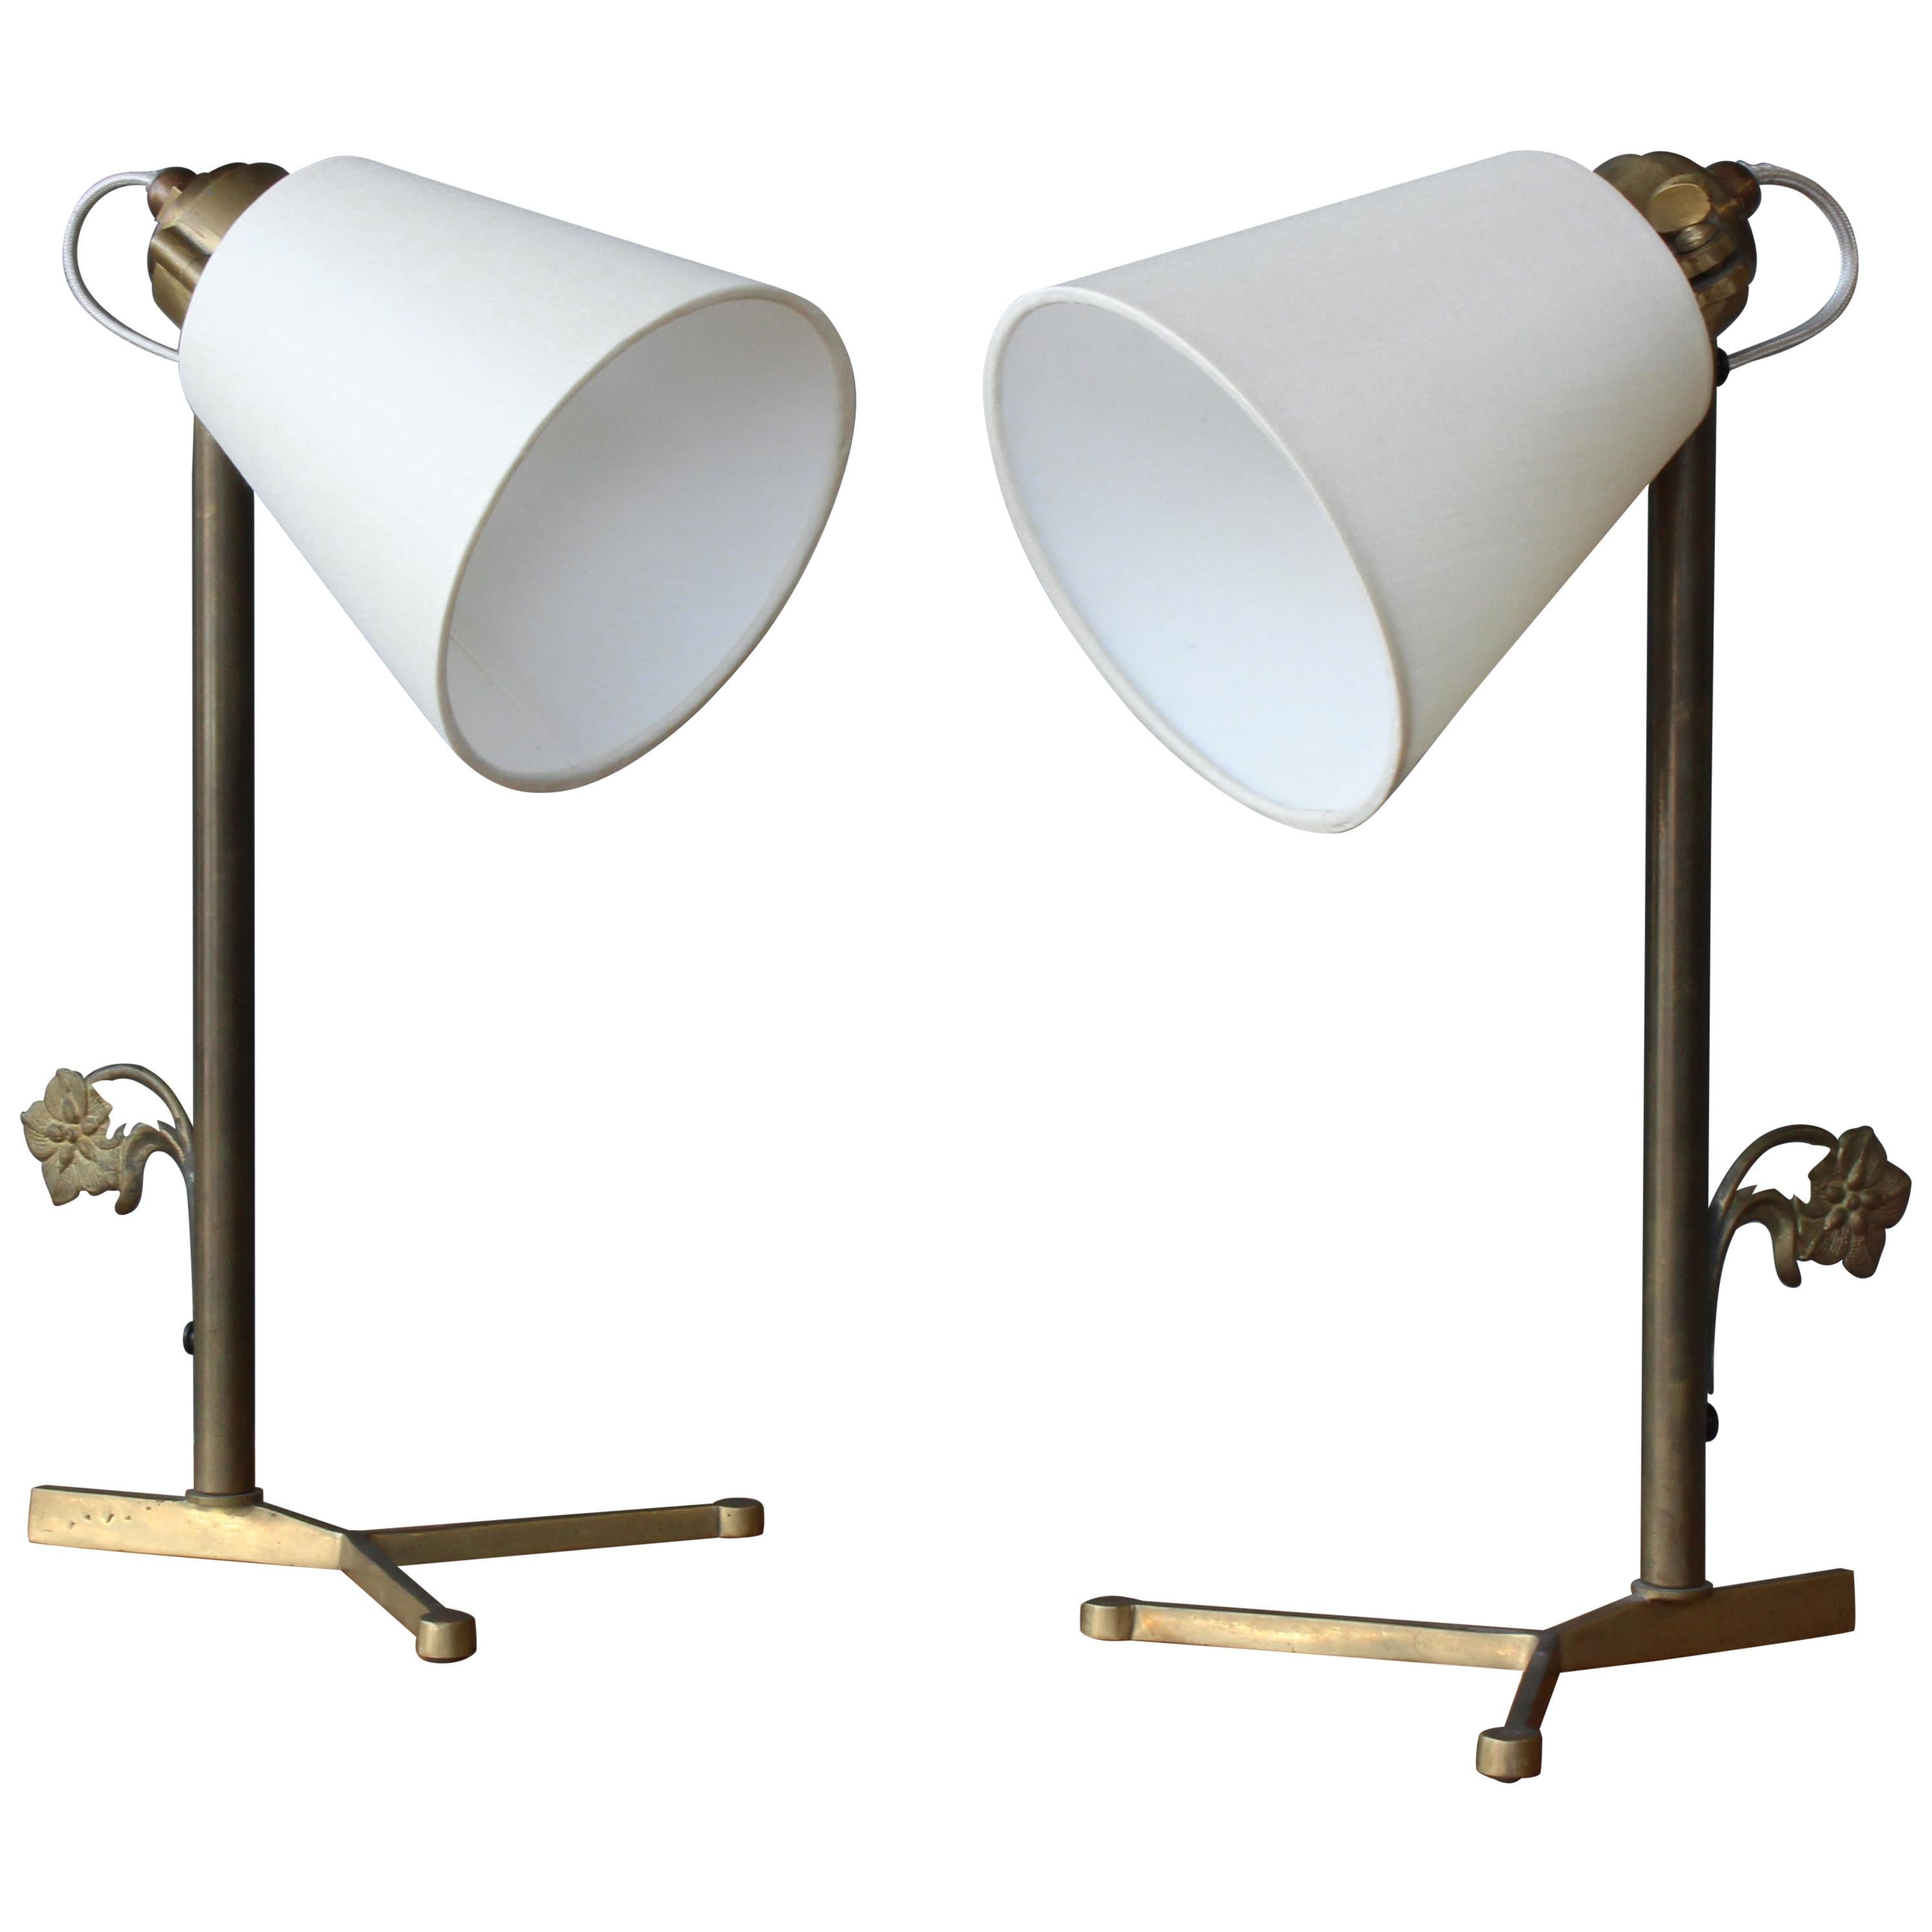 Pair of Brass Desk Lamps with Silk Shades, France, 1950s